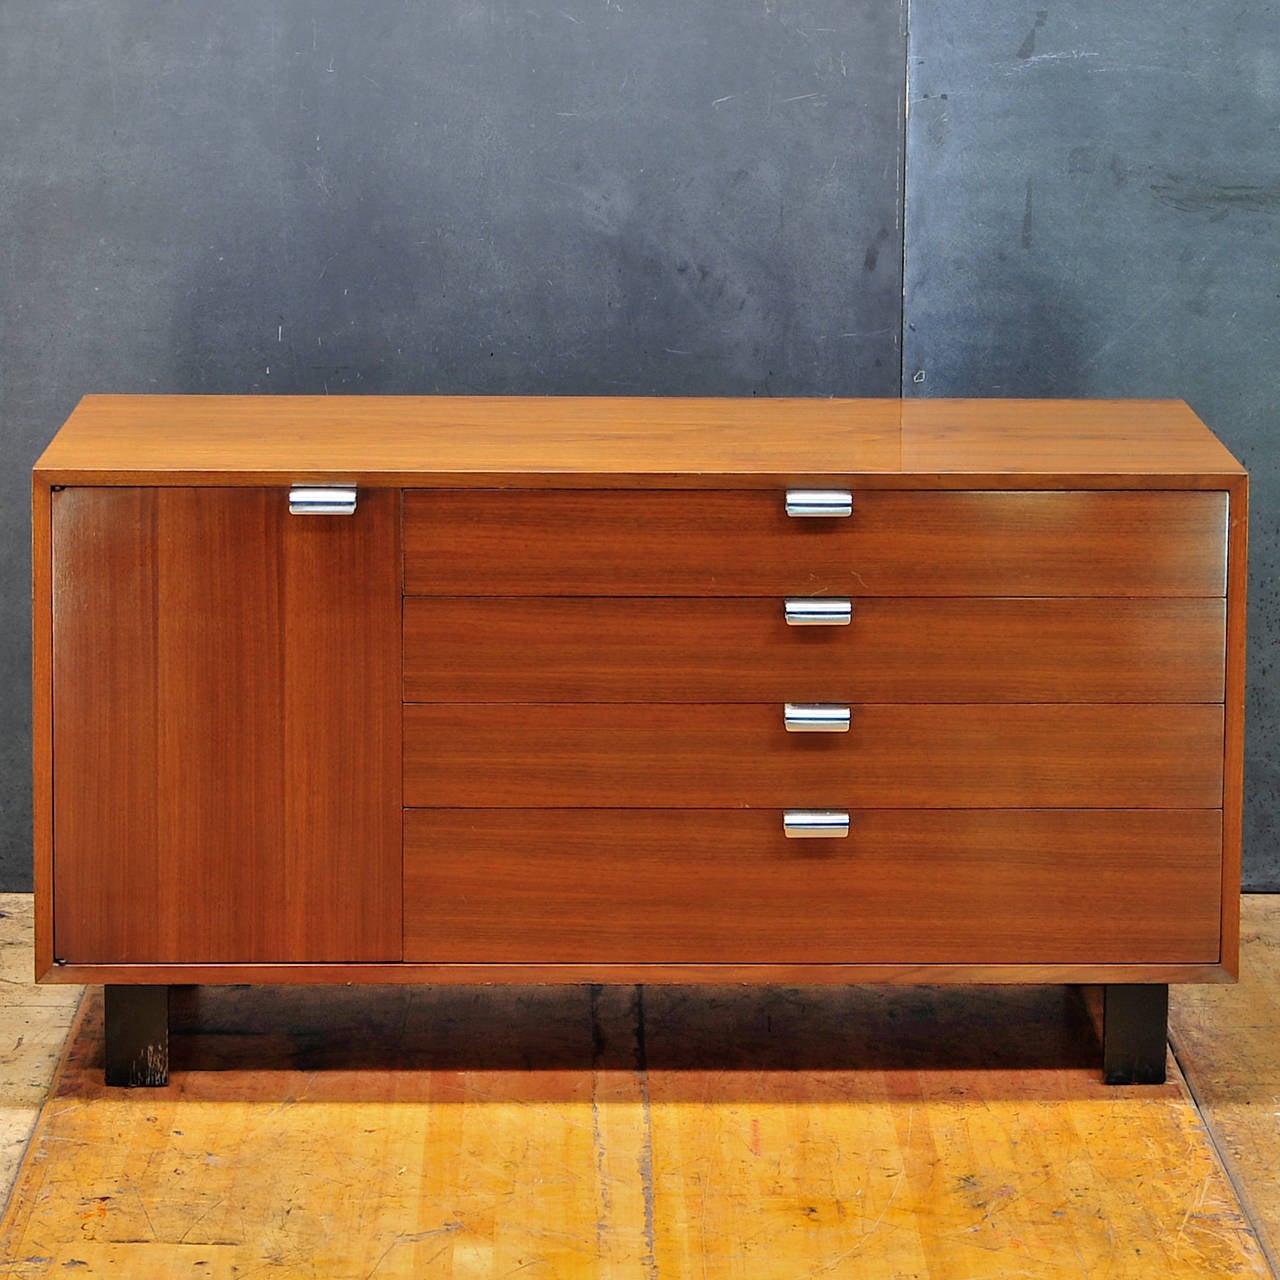 Original Finish and All Original as built from Herman Miller factory. 

USA, c.1960s. George Nelson and Associates 4712 Basic Cabinet Casegood Series in Walnut and Chrome. Very Good Vintage Condition, Original Finish, normal Wear.

W: 56¼ x D: 18½ x